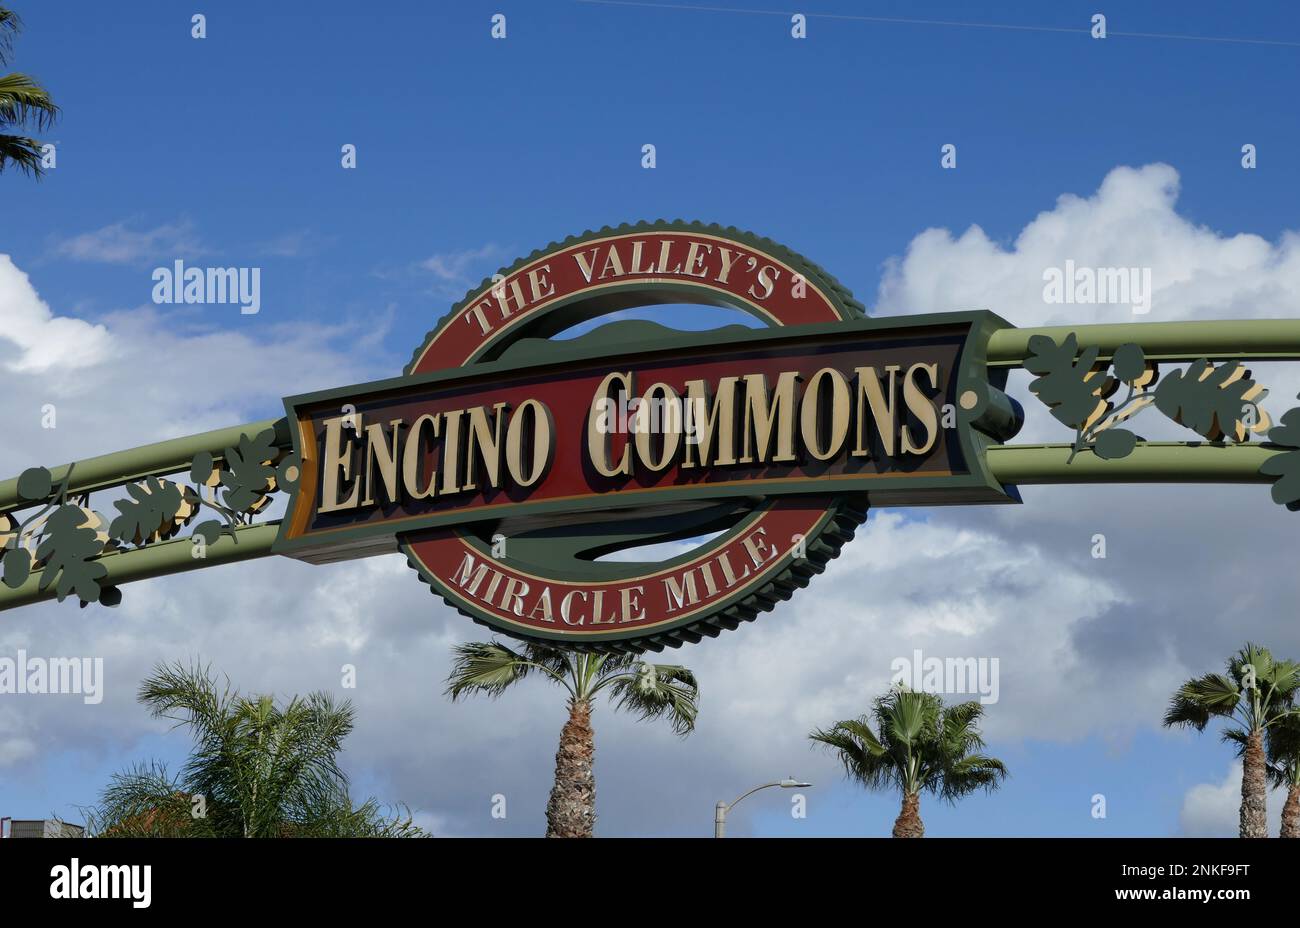 Encino, California, USA 22nd February 2023 The Valley's Encino Commons Miracle Mile Sign on Ventura Blvd in Encino, California, USA. Photo by Barry King/Alamy Stock Photo Stock Photo